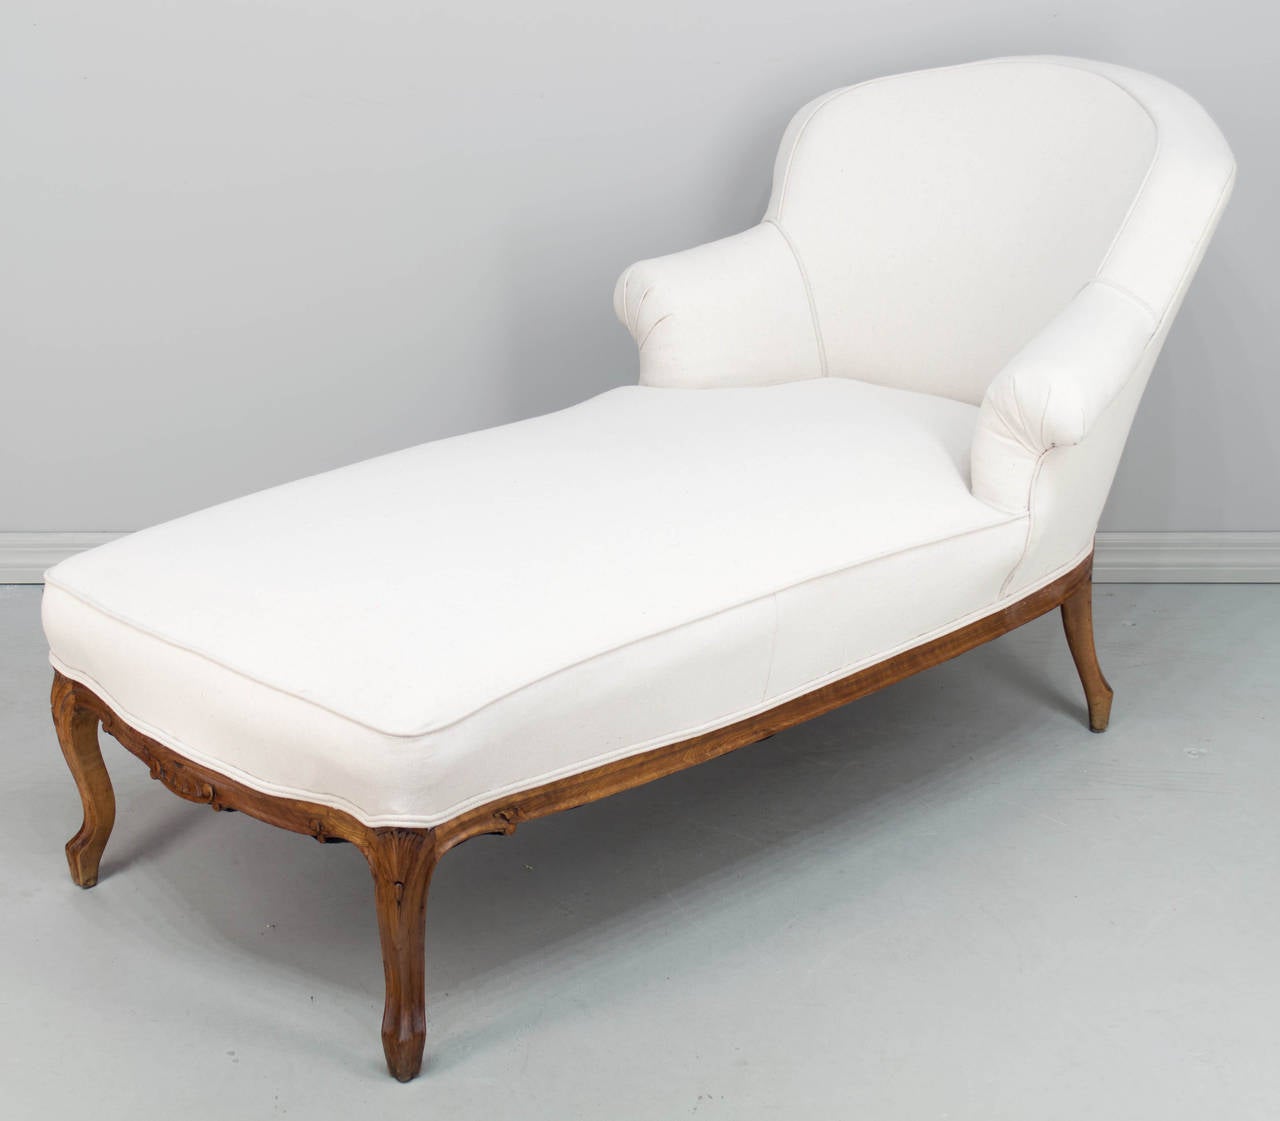 Louis XV Style recamier or chaise longue with a walnut frame. Sturdy and comfortable. Reupholstered in a neutral canvas fabric. The seating area is 54